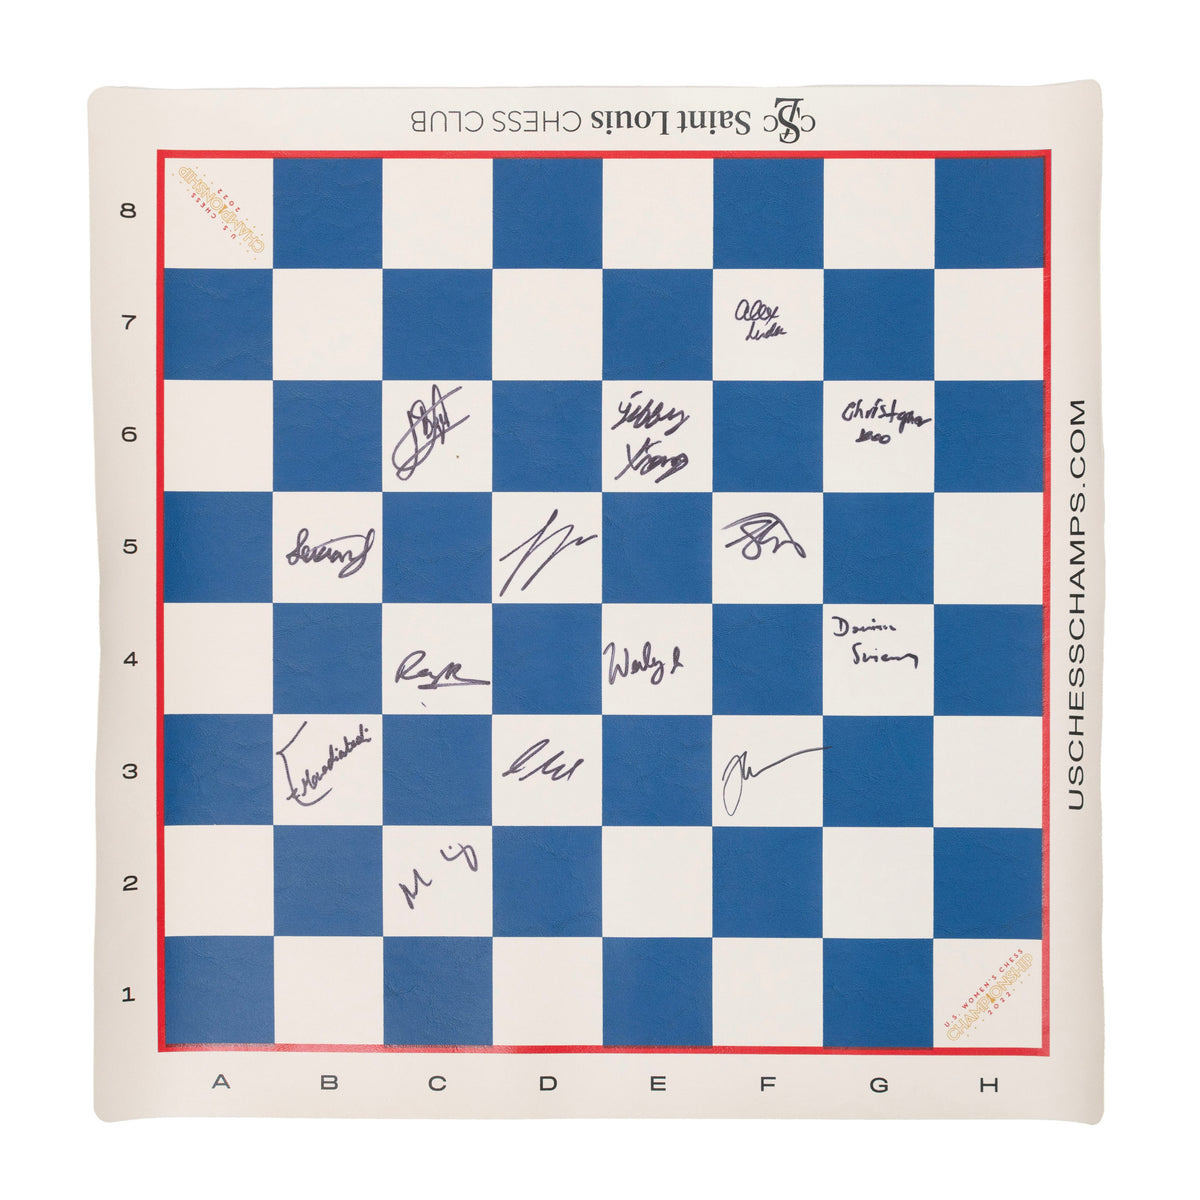 2022 Saint Louis Rapid & Blitz Roll-up Vinyl Board [Autographed] – World  Chess Hall of Fame